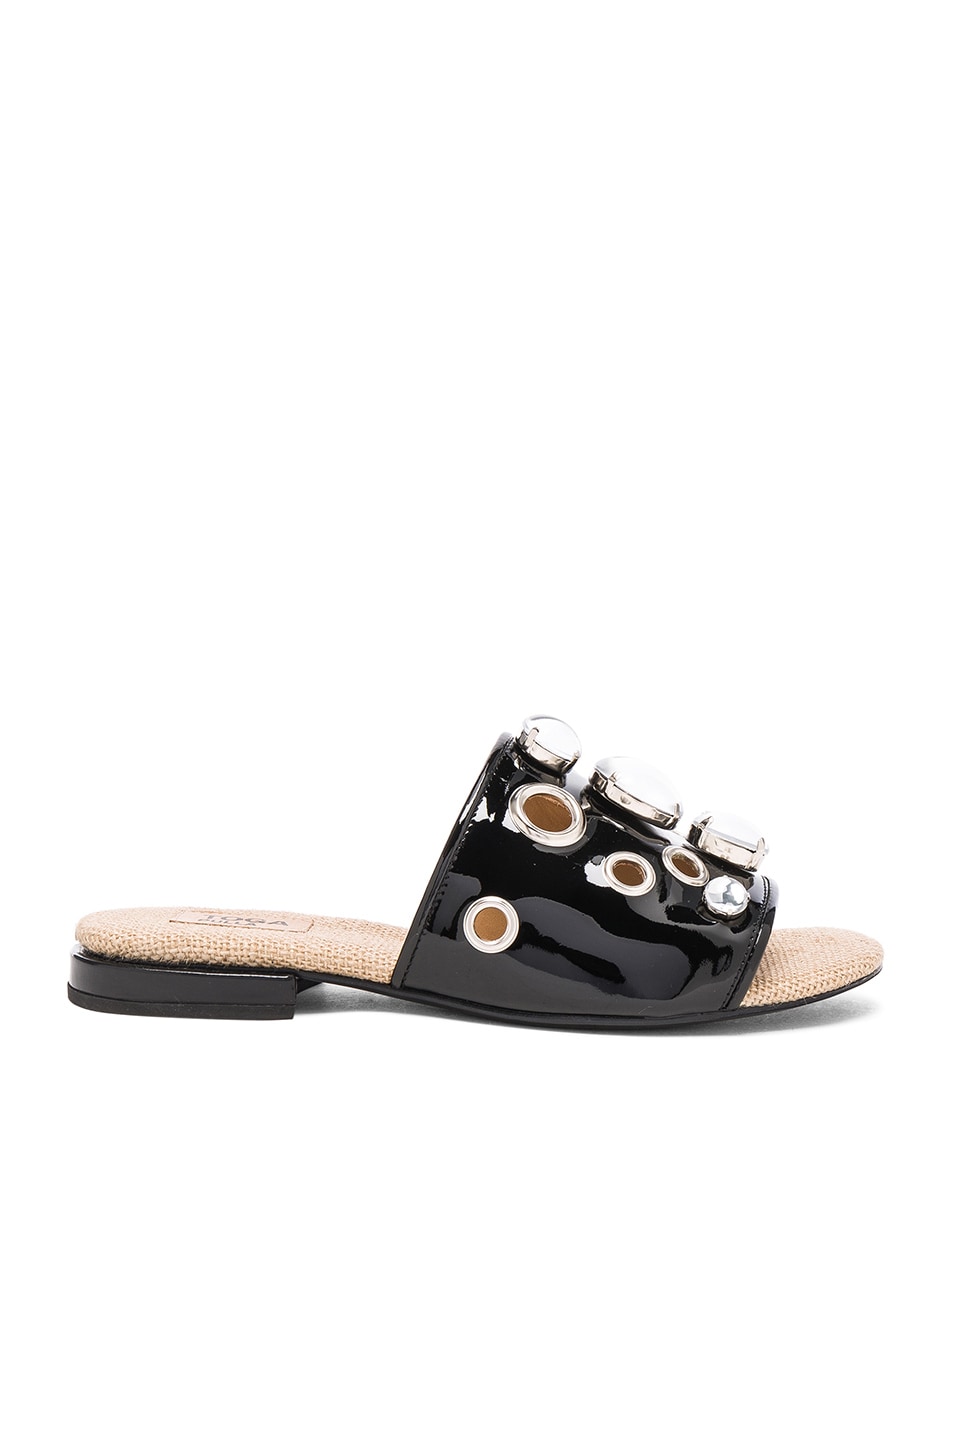 Image 1 of TOGA PULLA Patent Leather Sandals in Black Patent